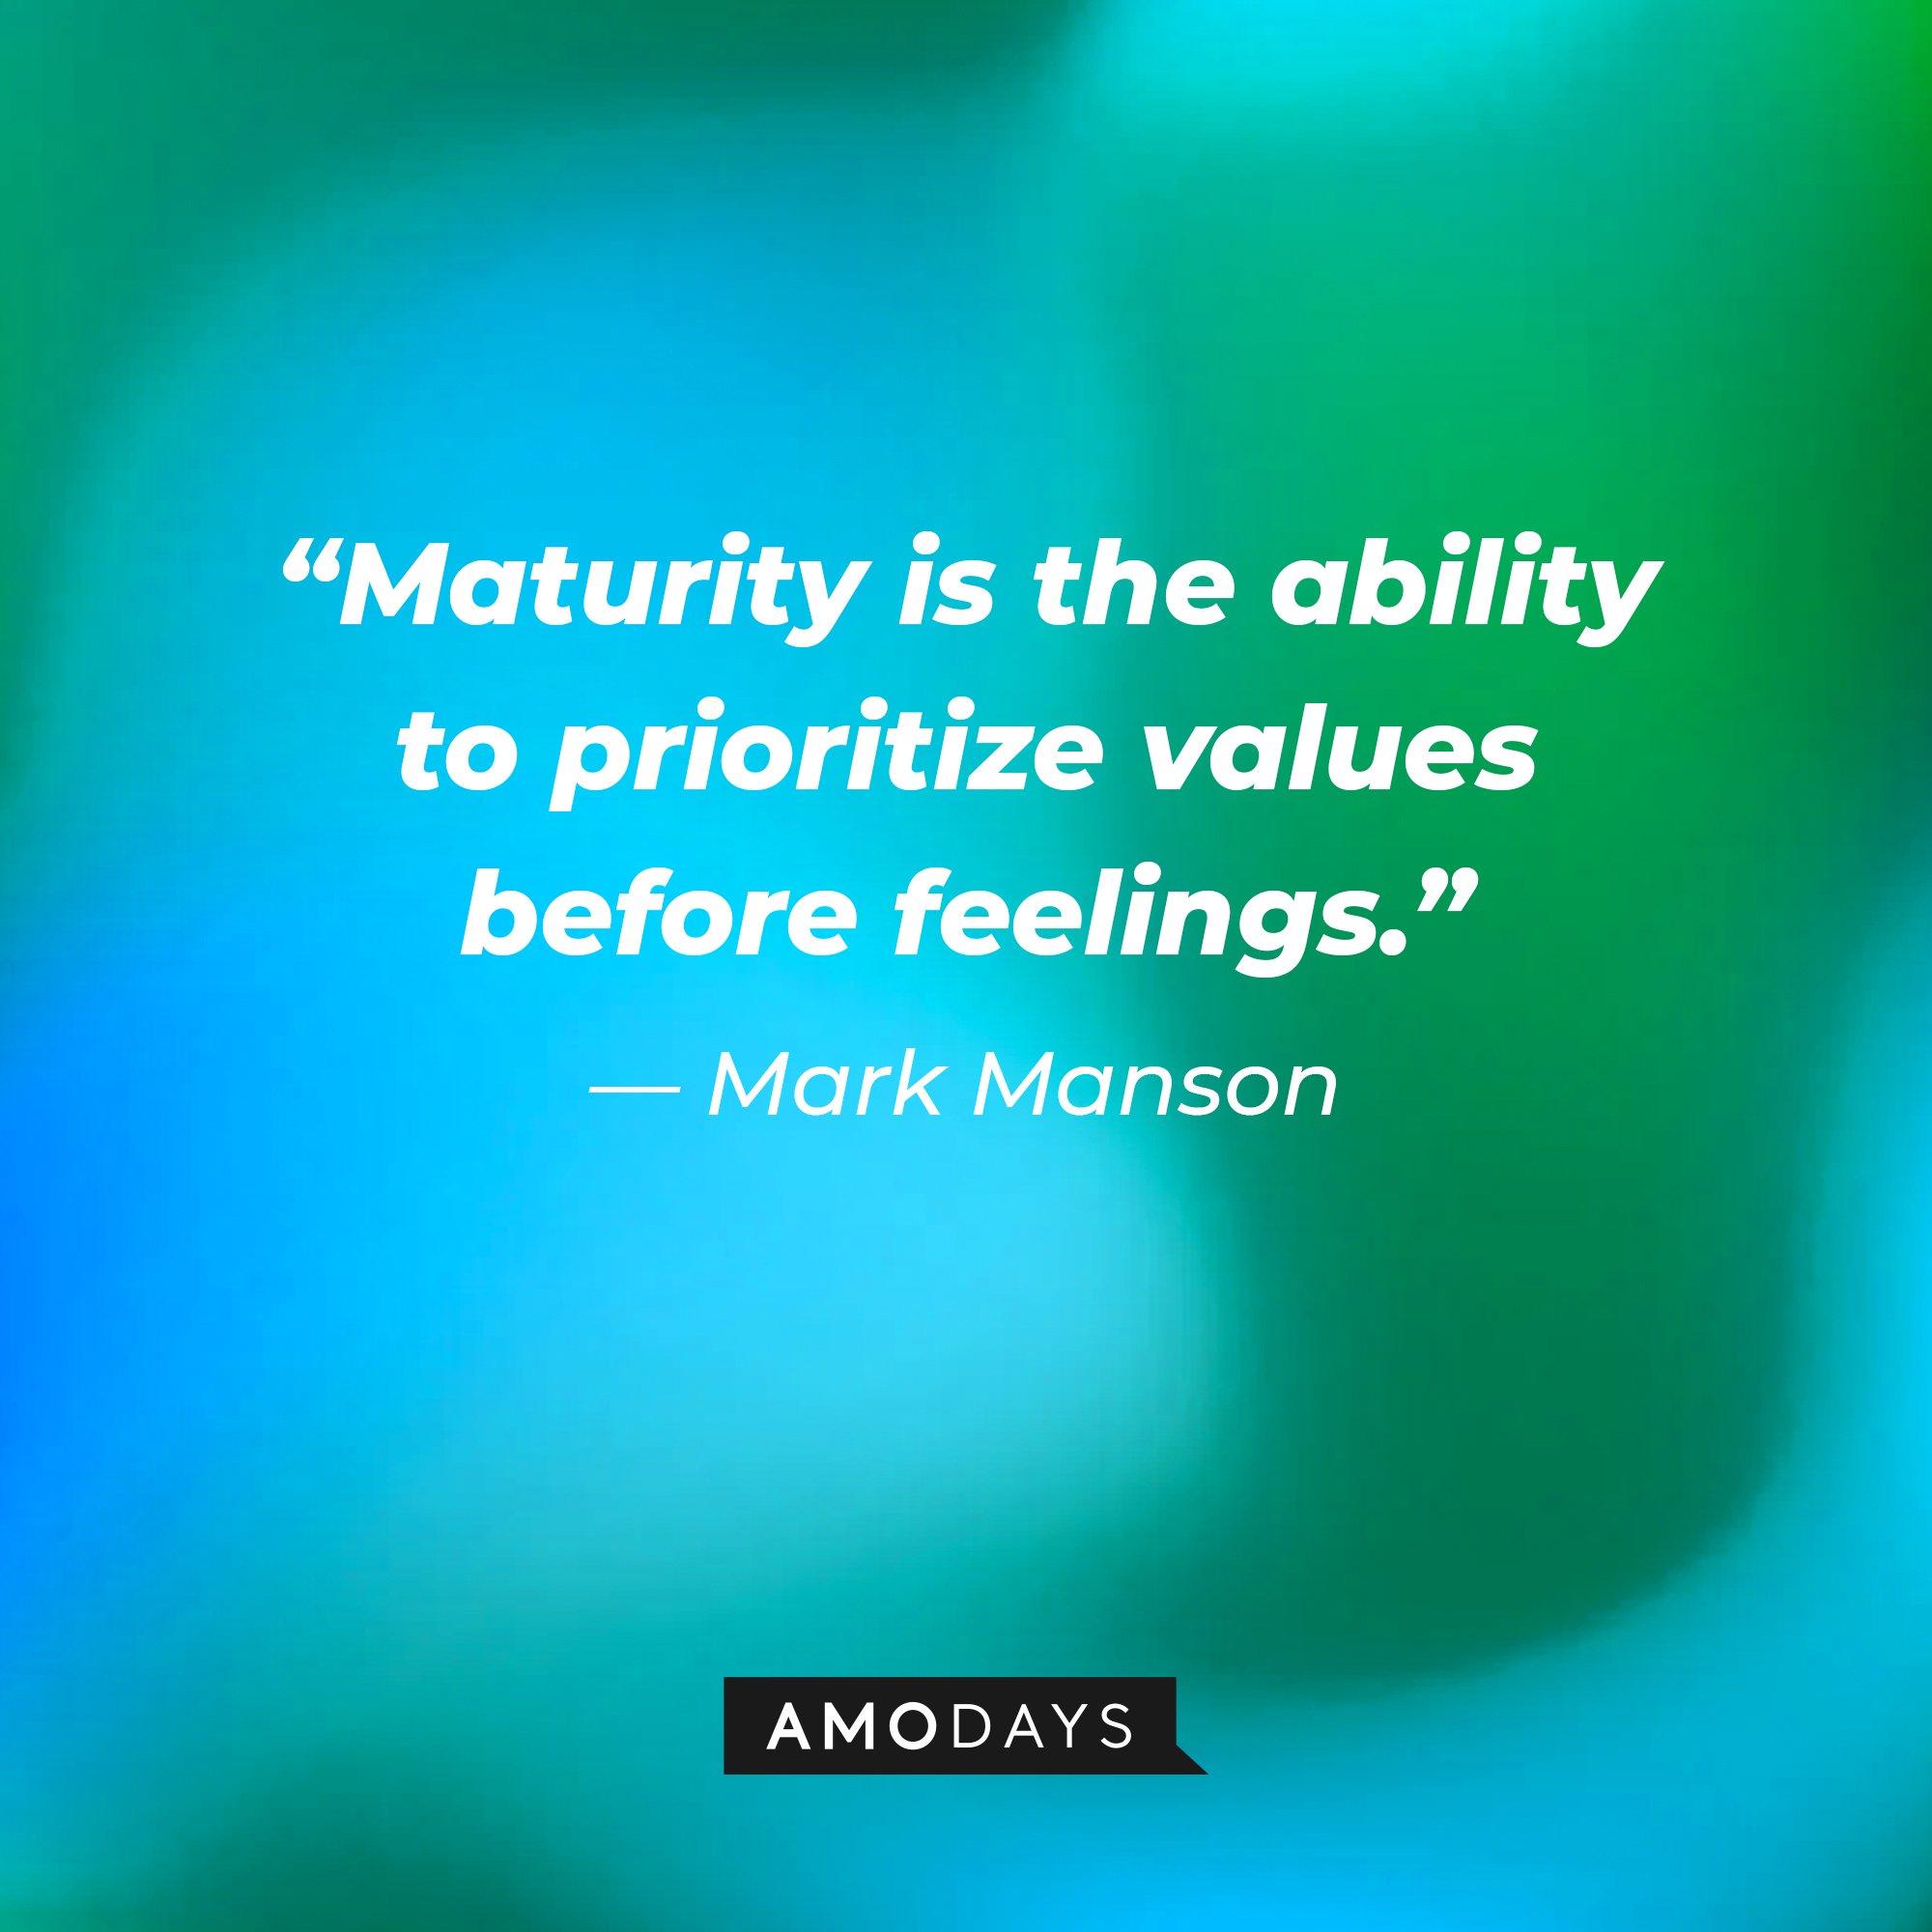 Mark Manson's quote: “Maturity is the ability to prioritize values before feelings.” | Image: AmoDays